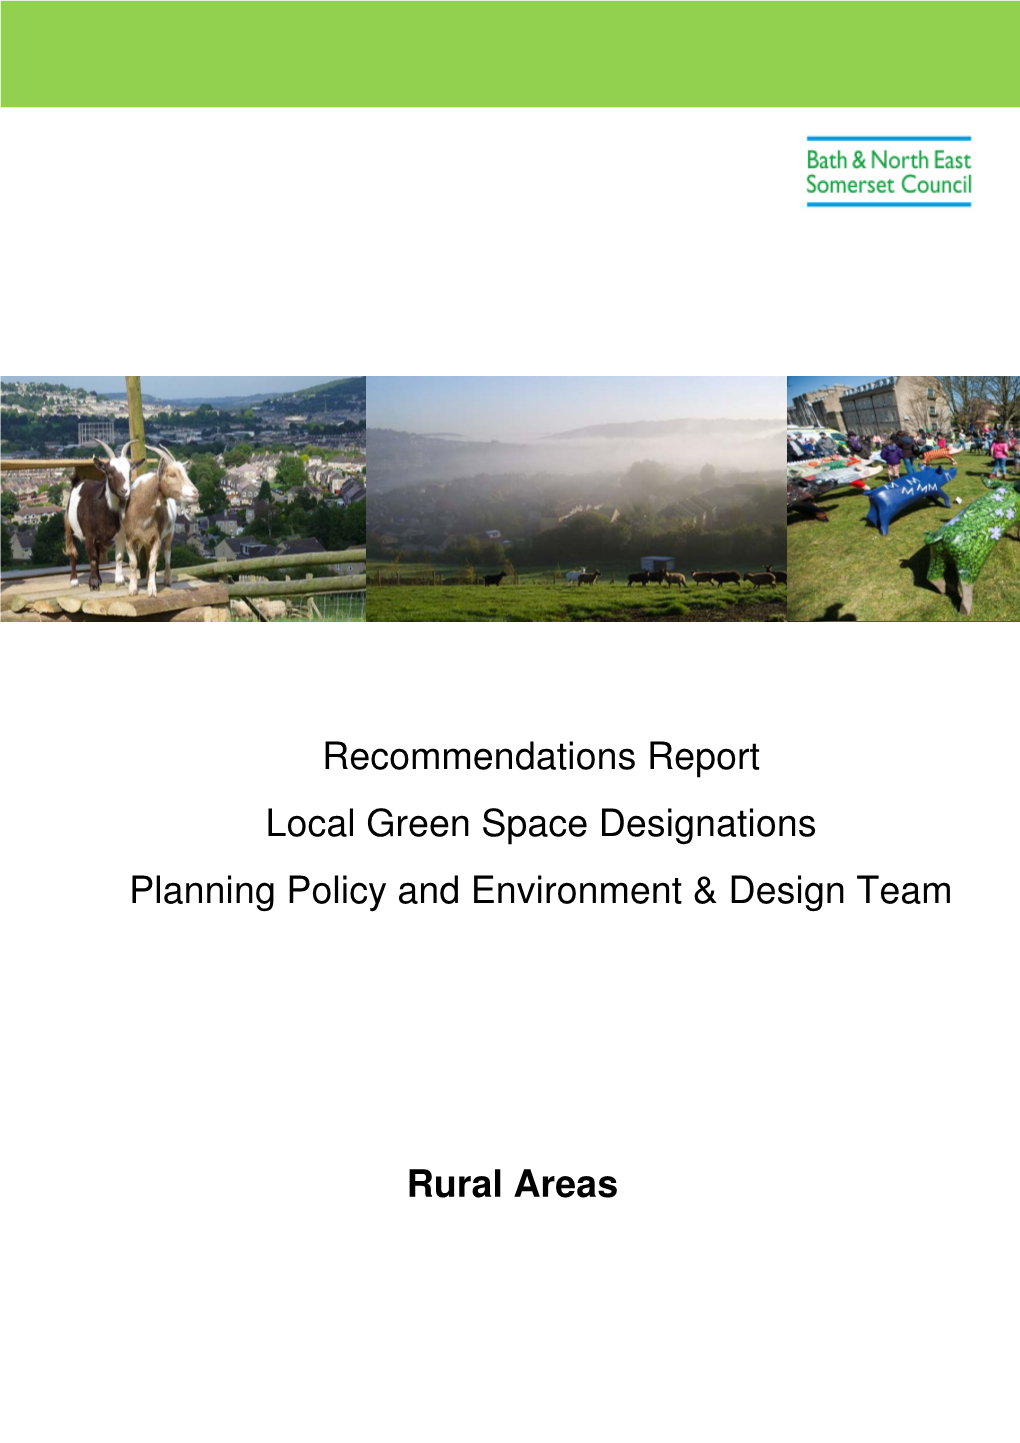 Recommendations Report Local Green Space Designations Planning Policy and Environment & Design Team